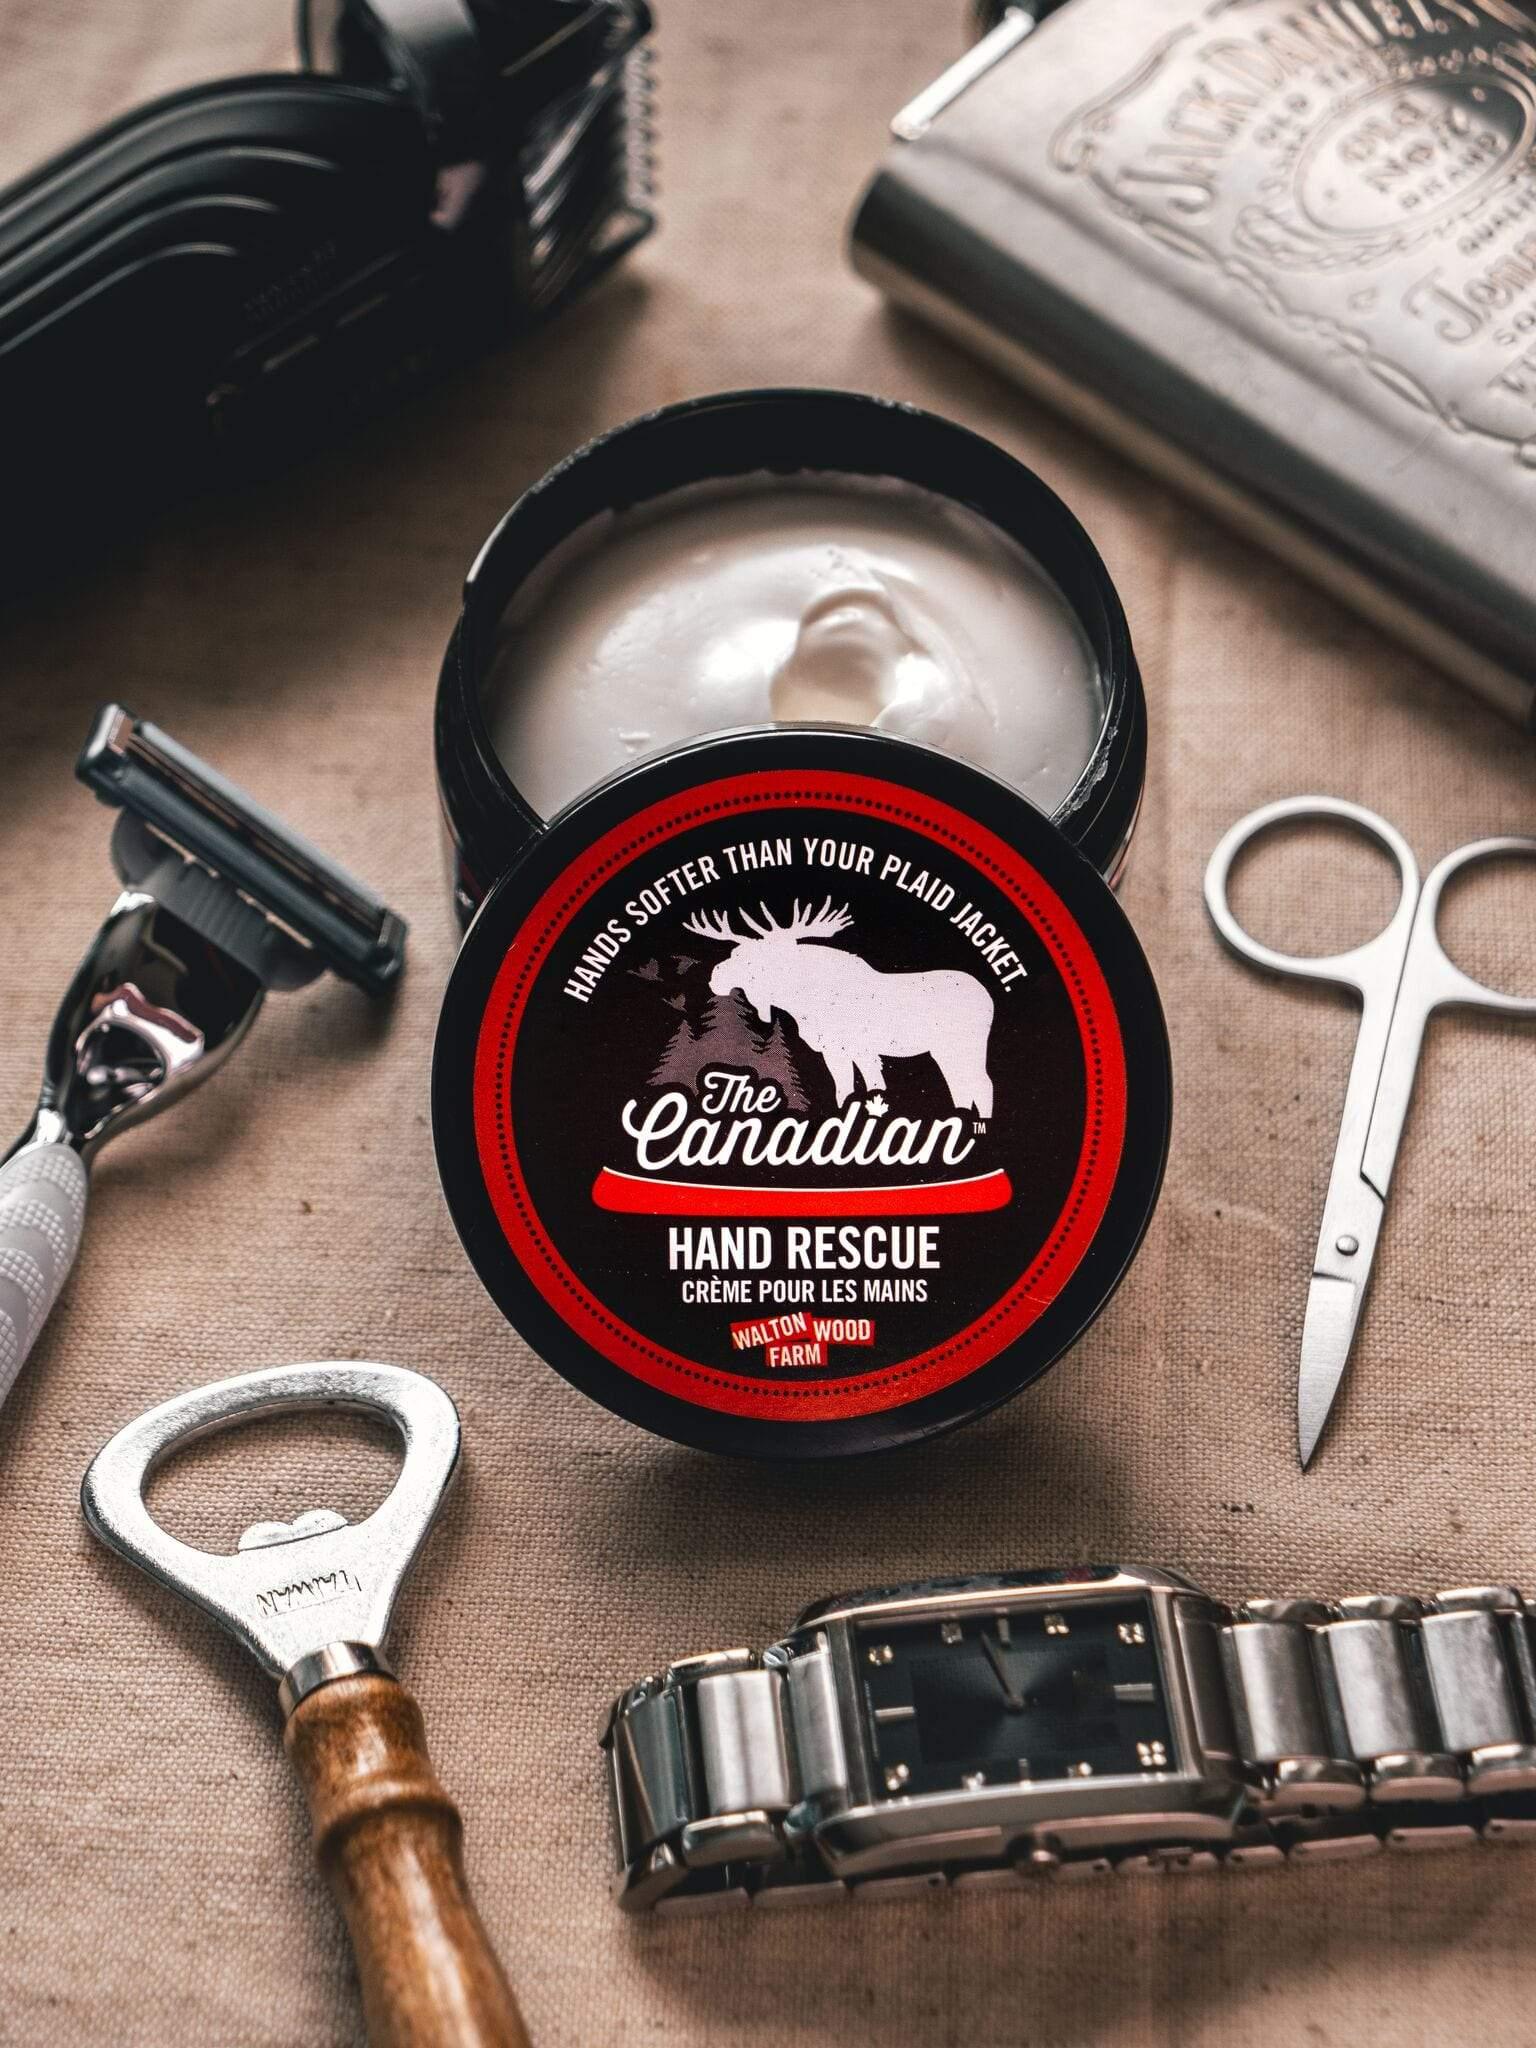 Canadian Hand Rescue - Maple Bark & Wild Portage Trail - The Wandering Merchant